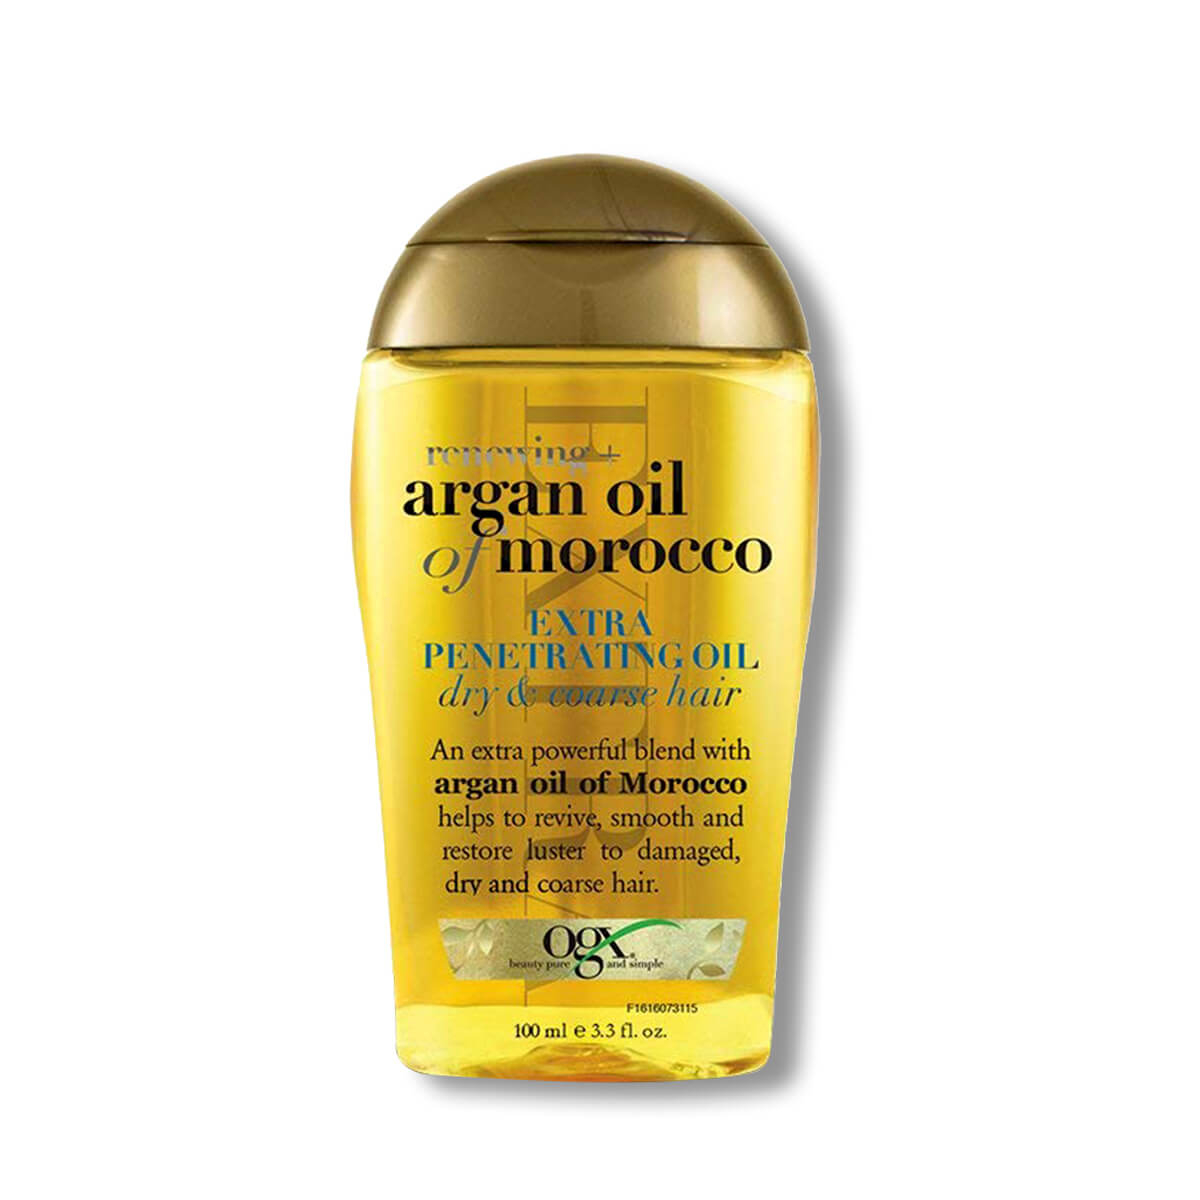 OGX- ARGAN OIL OF MOROCCO EXTRA PENETRATING OIL dry & coarse hair